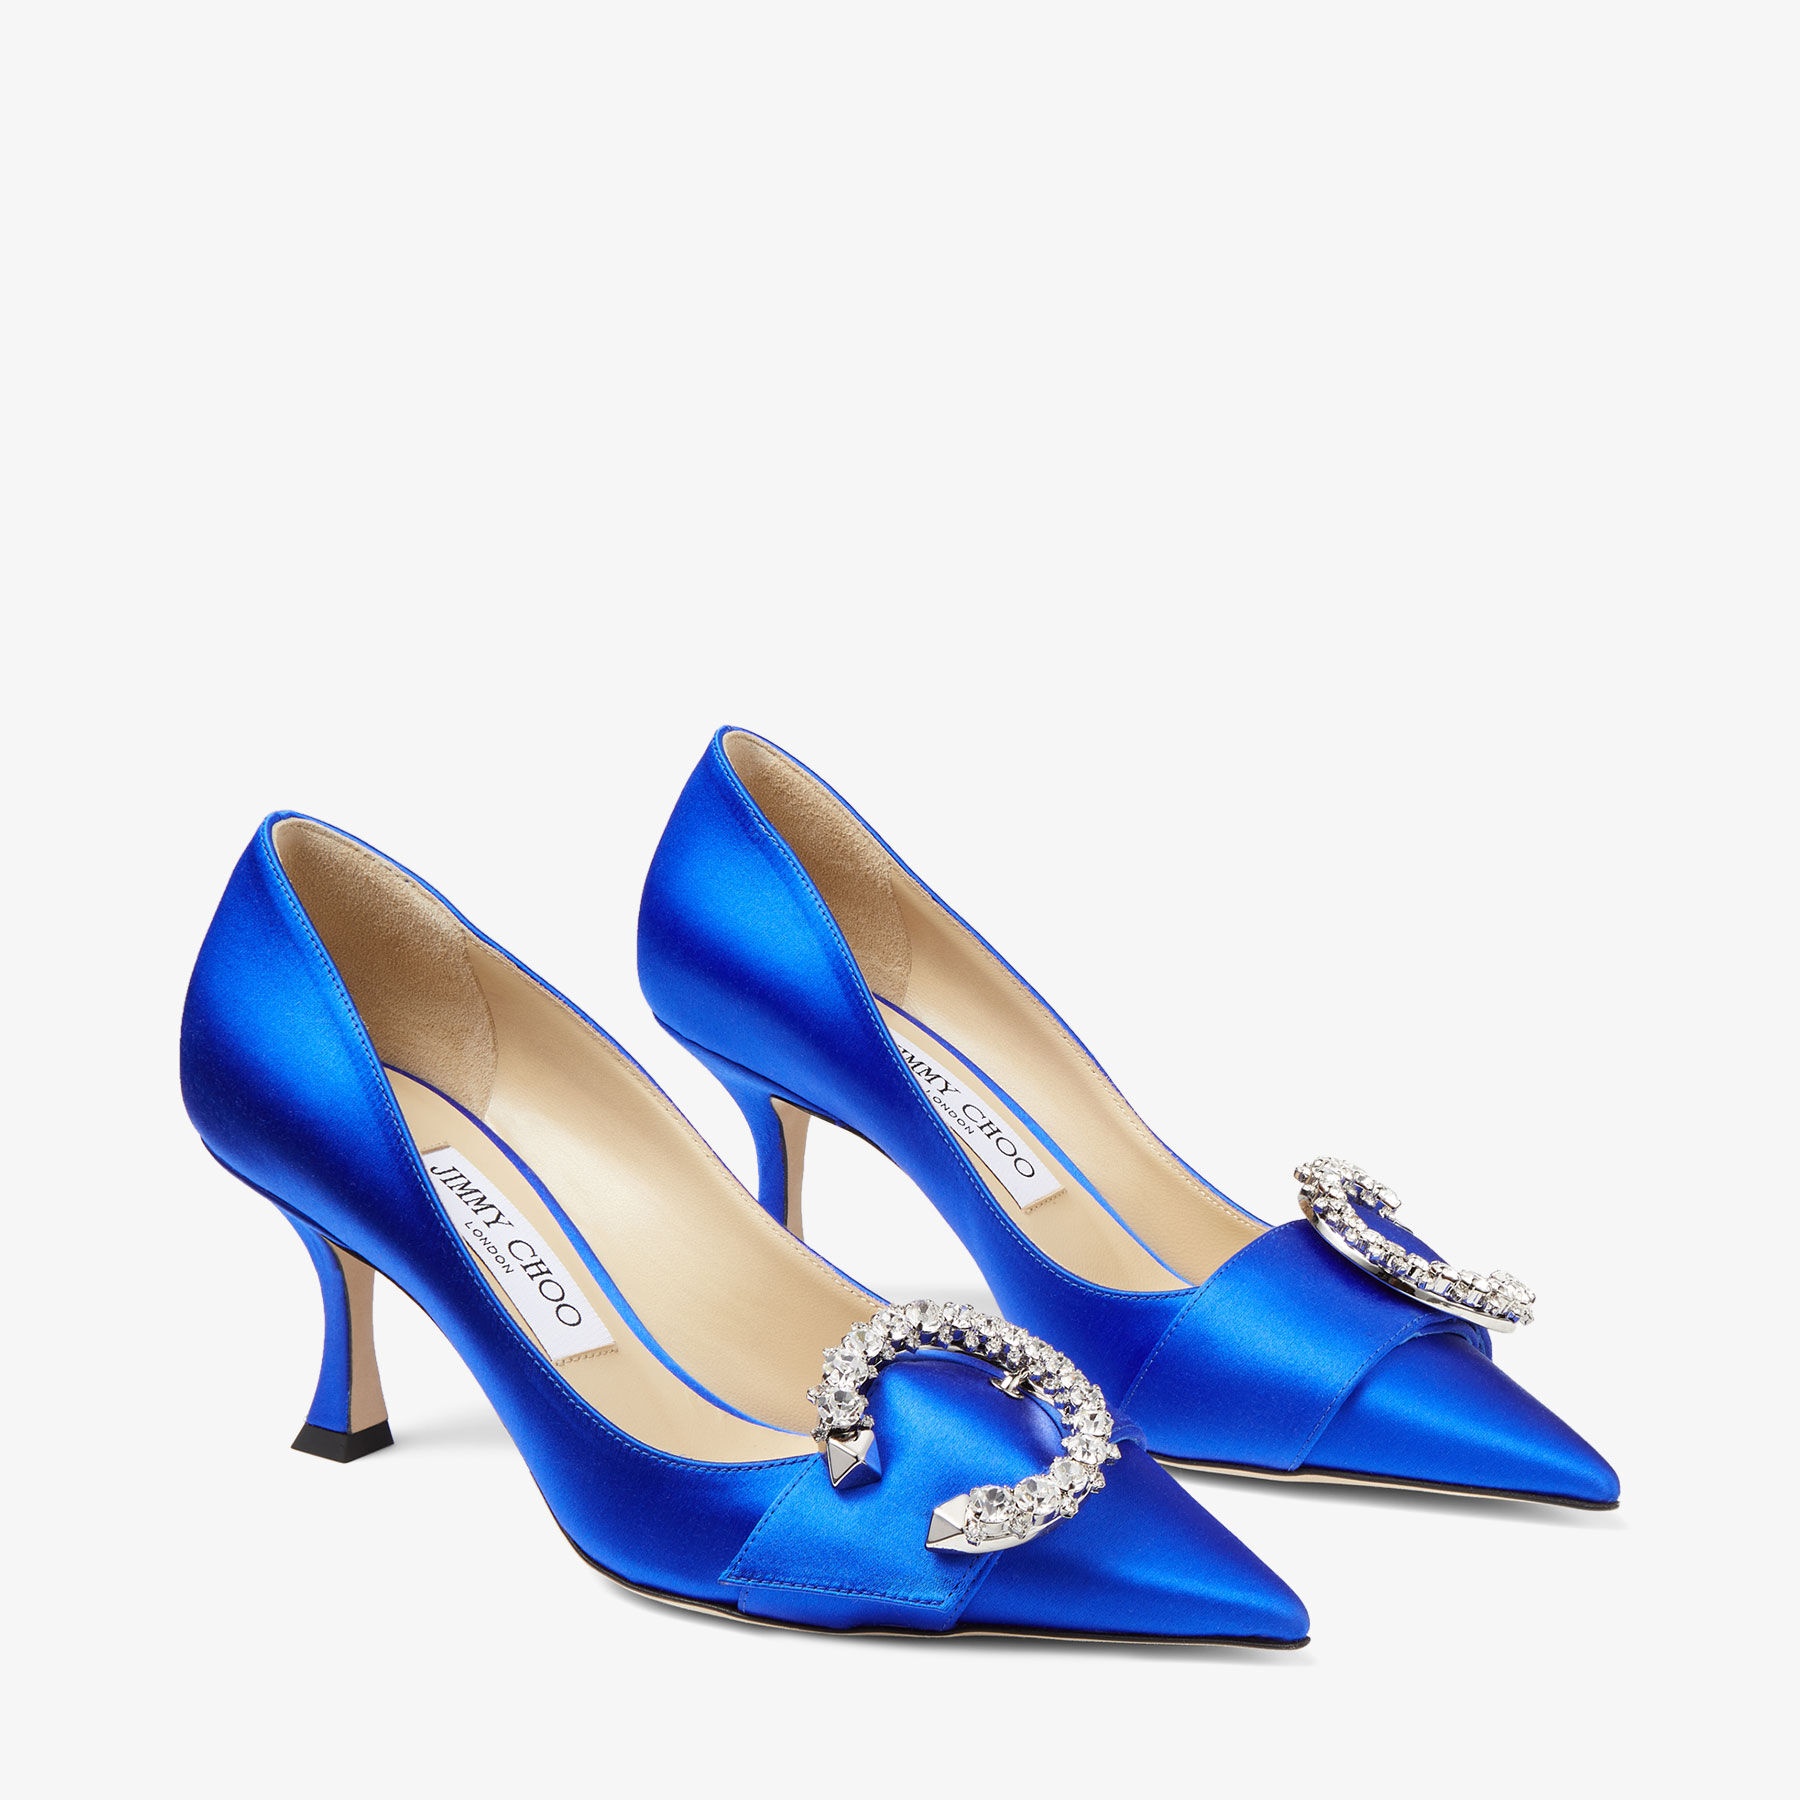 Melva 70
Ultraviolet Satin Pointed-Toe Pumps with Crystal Buckle - 3